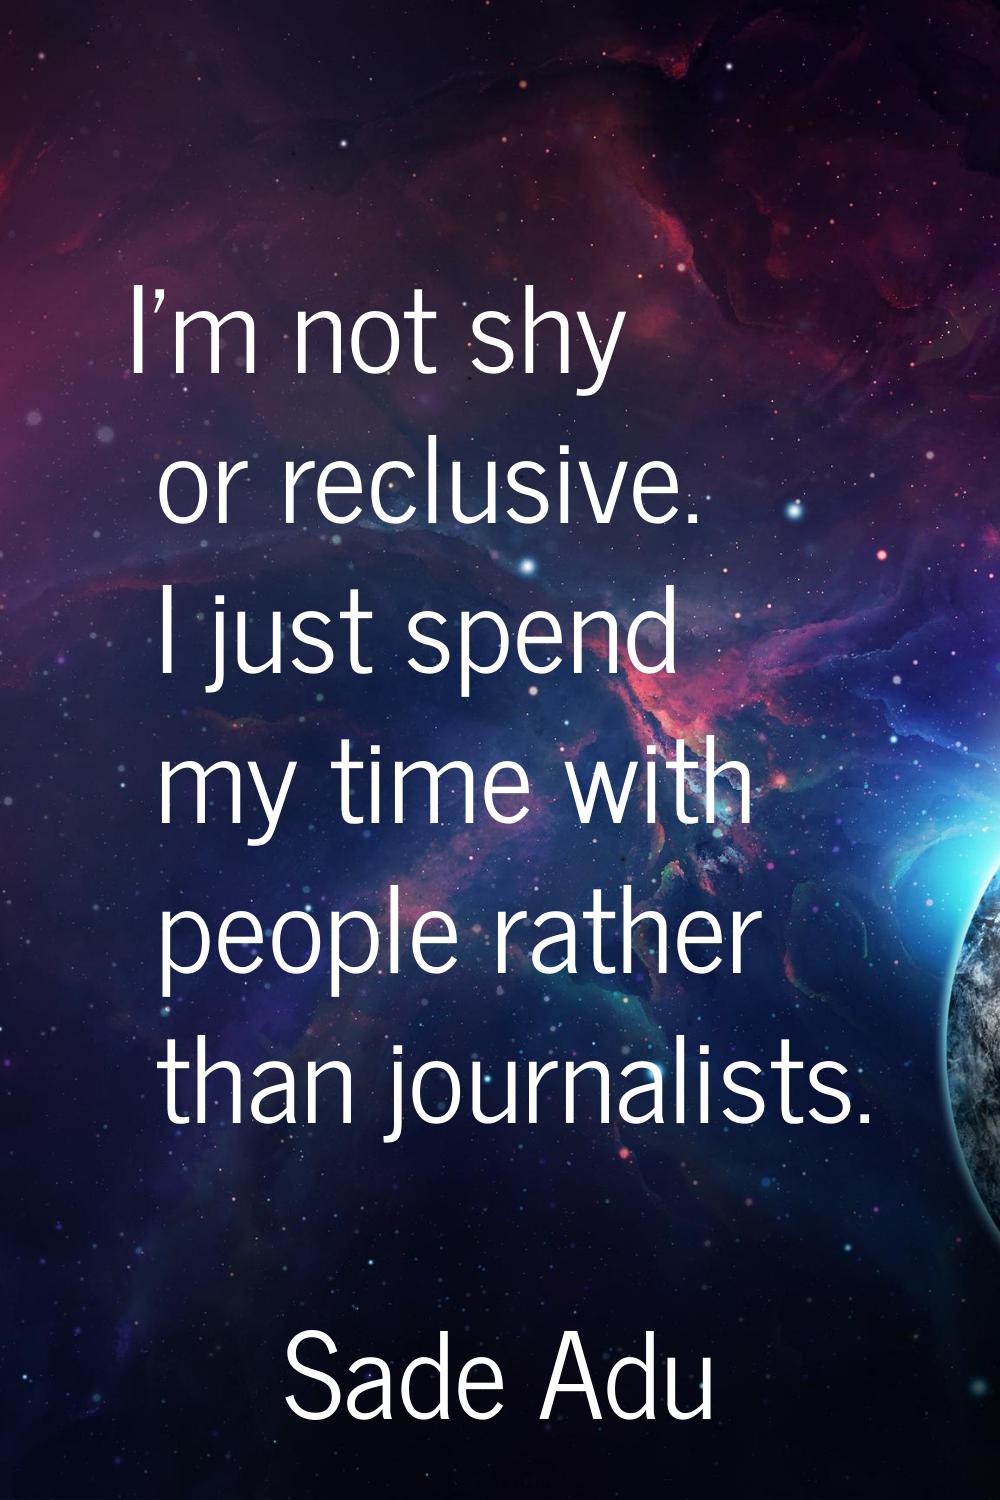 I'm not shy or reclusive. I just spend my time with people rather than journalists.